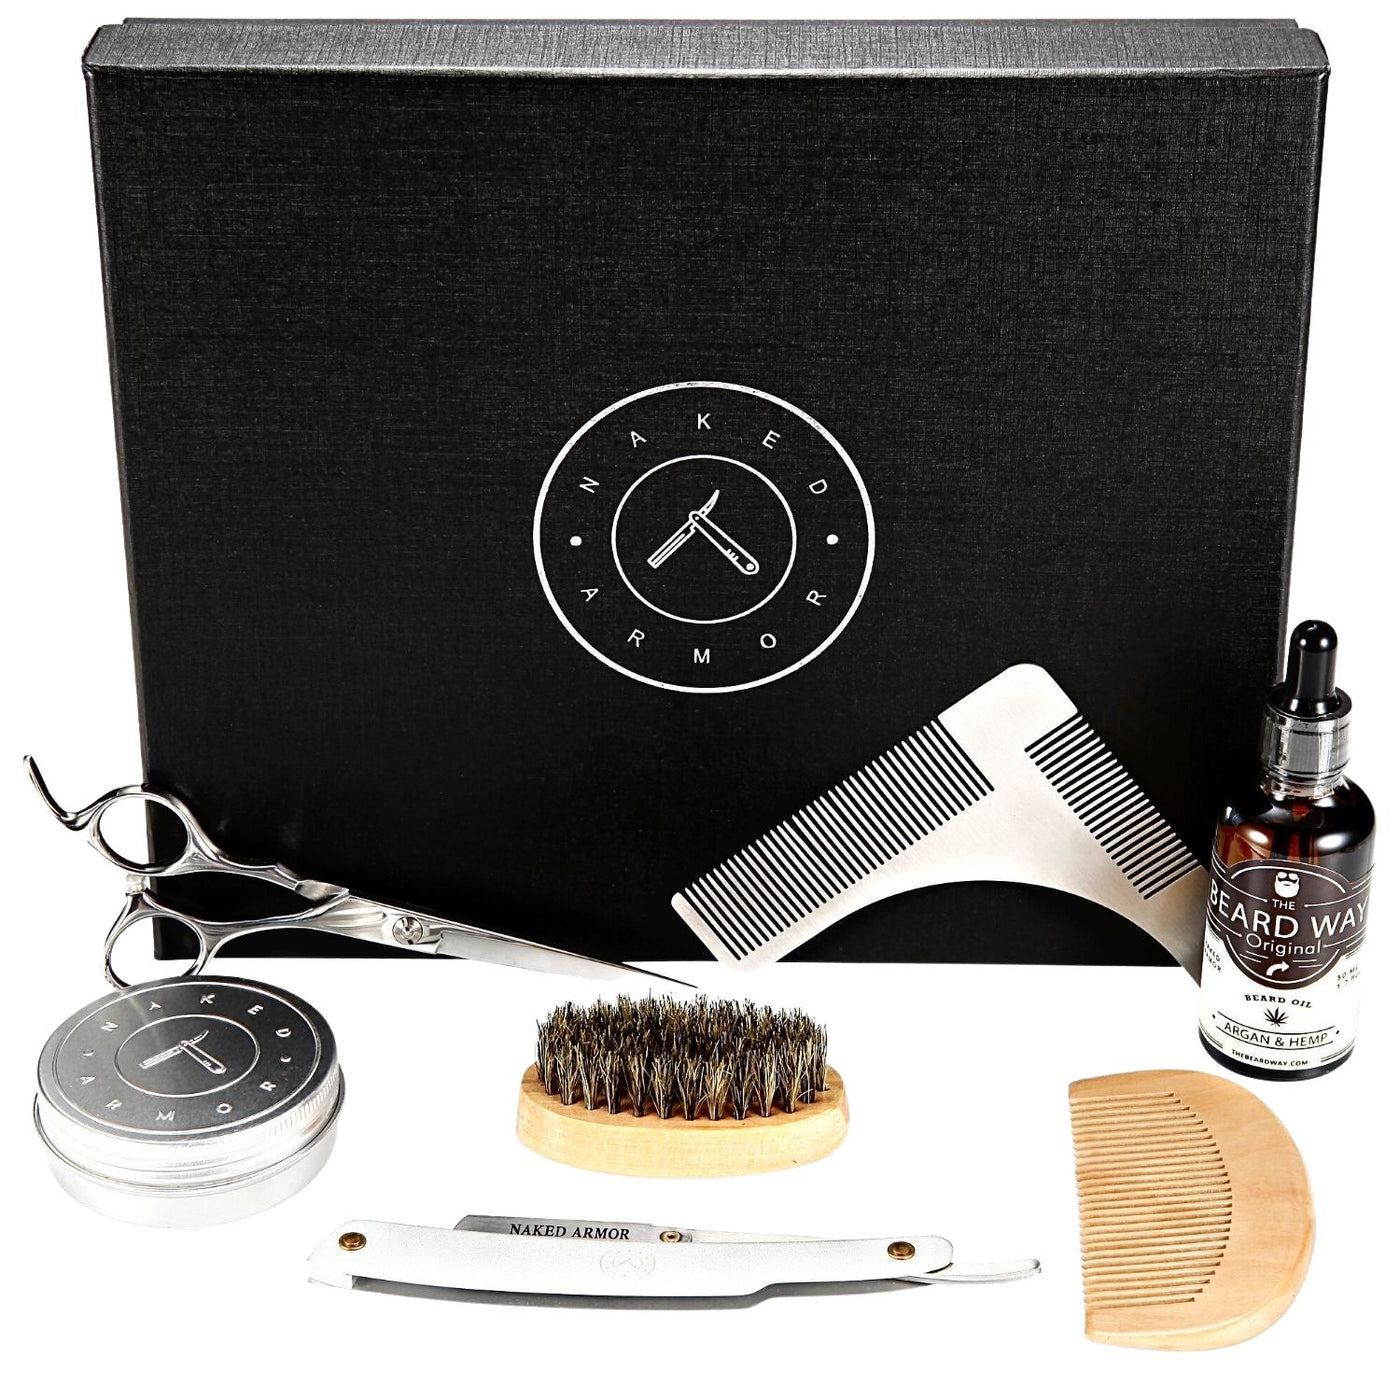  Grizzly Beard Kit by Naked Armor sold by Naked Armor Razors